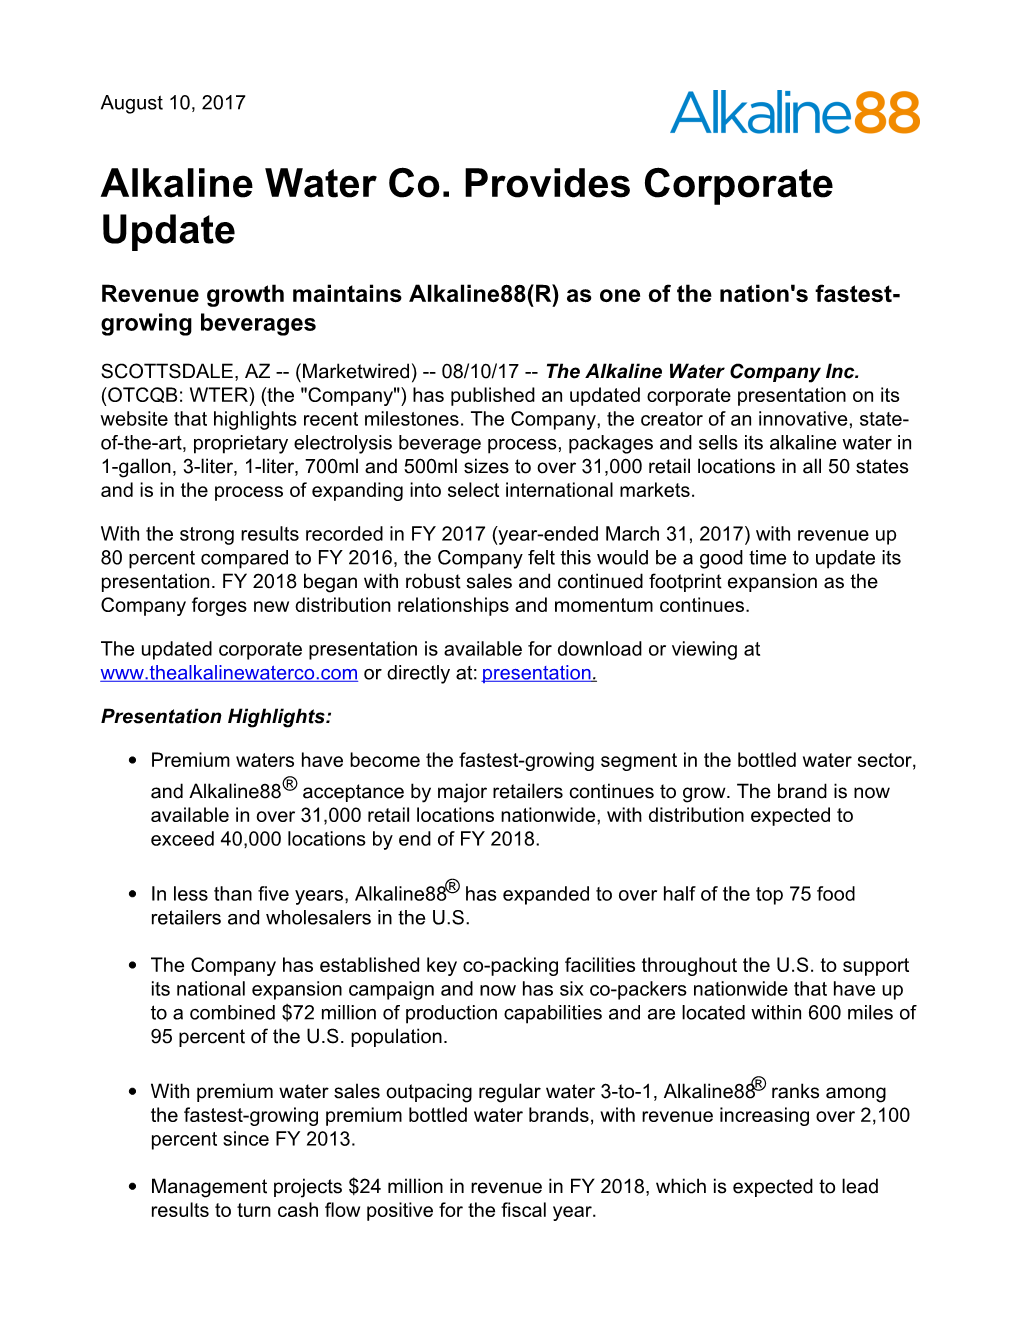 Alkaline Water Co. Provides Corporate Update